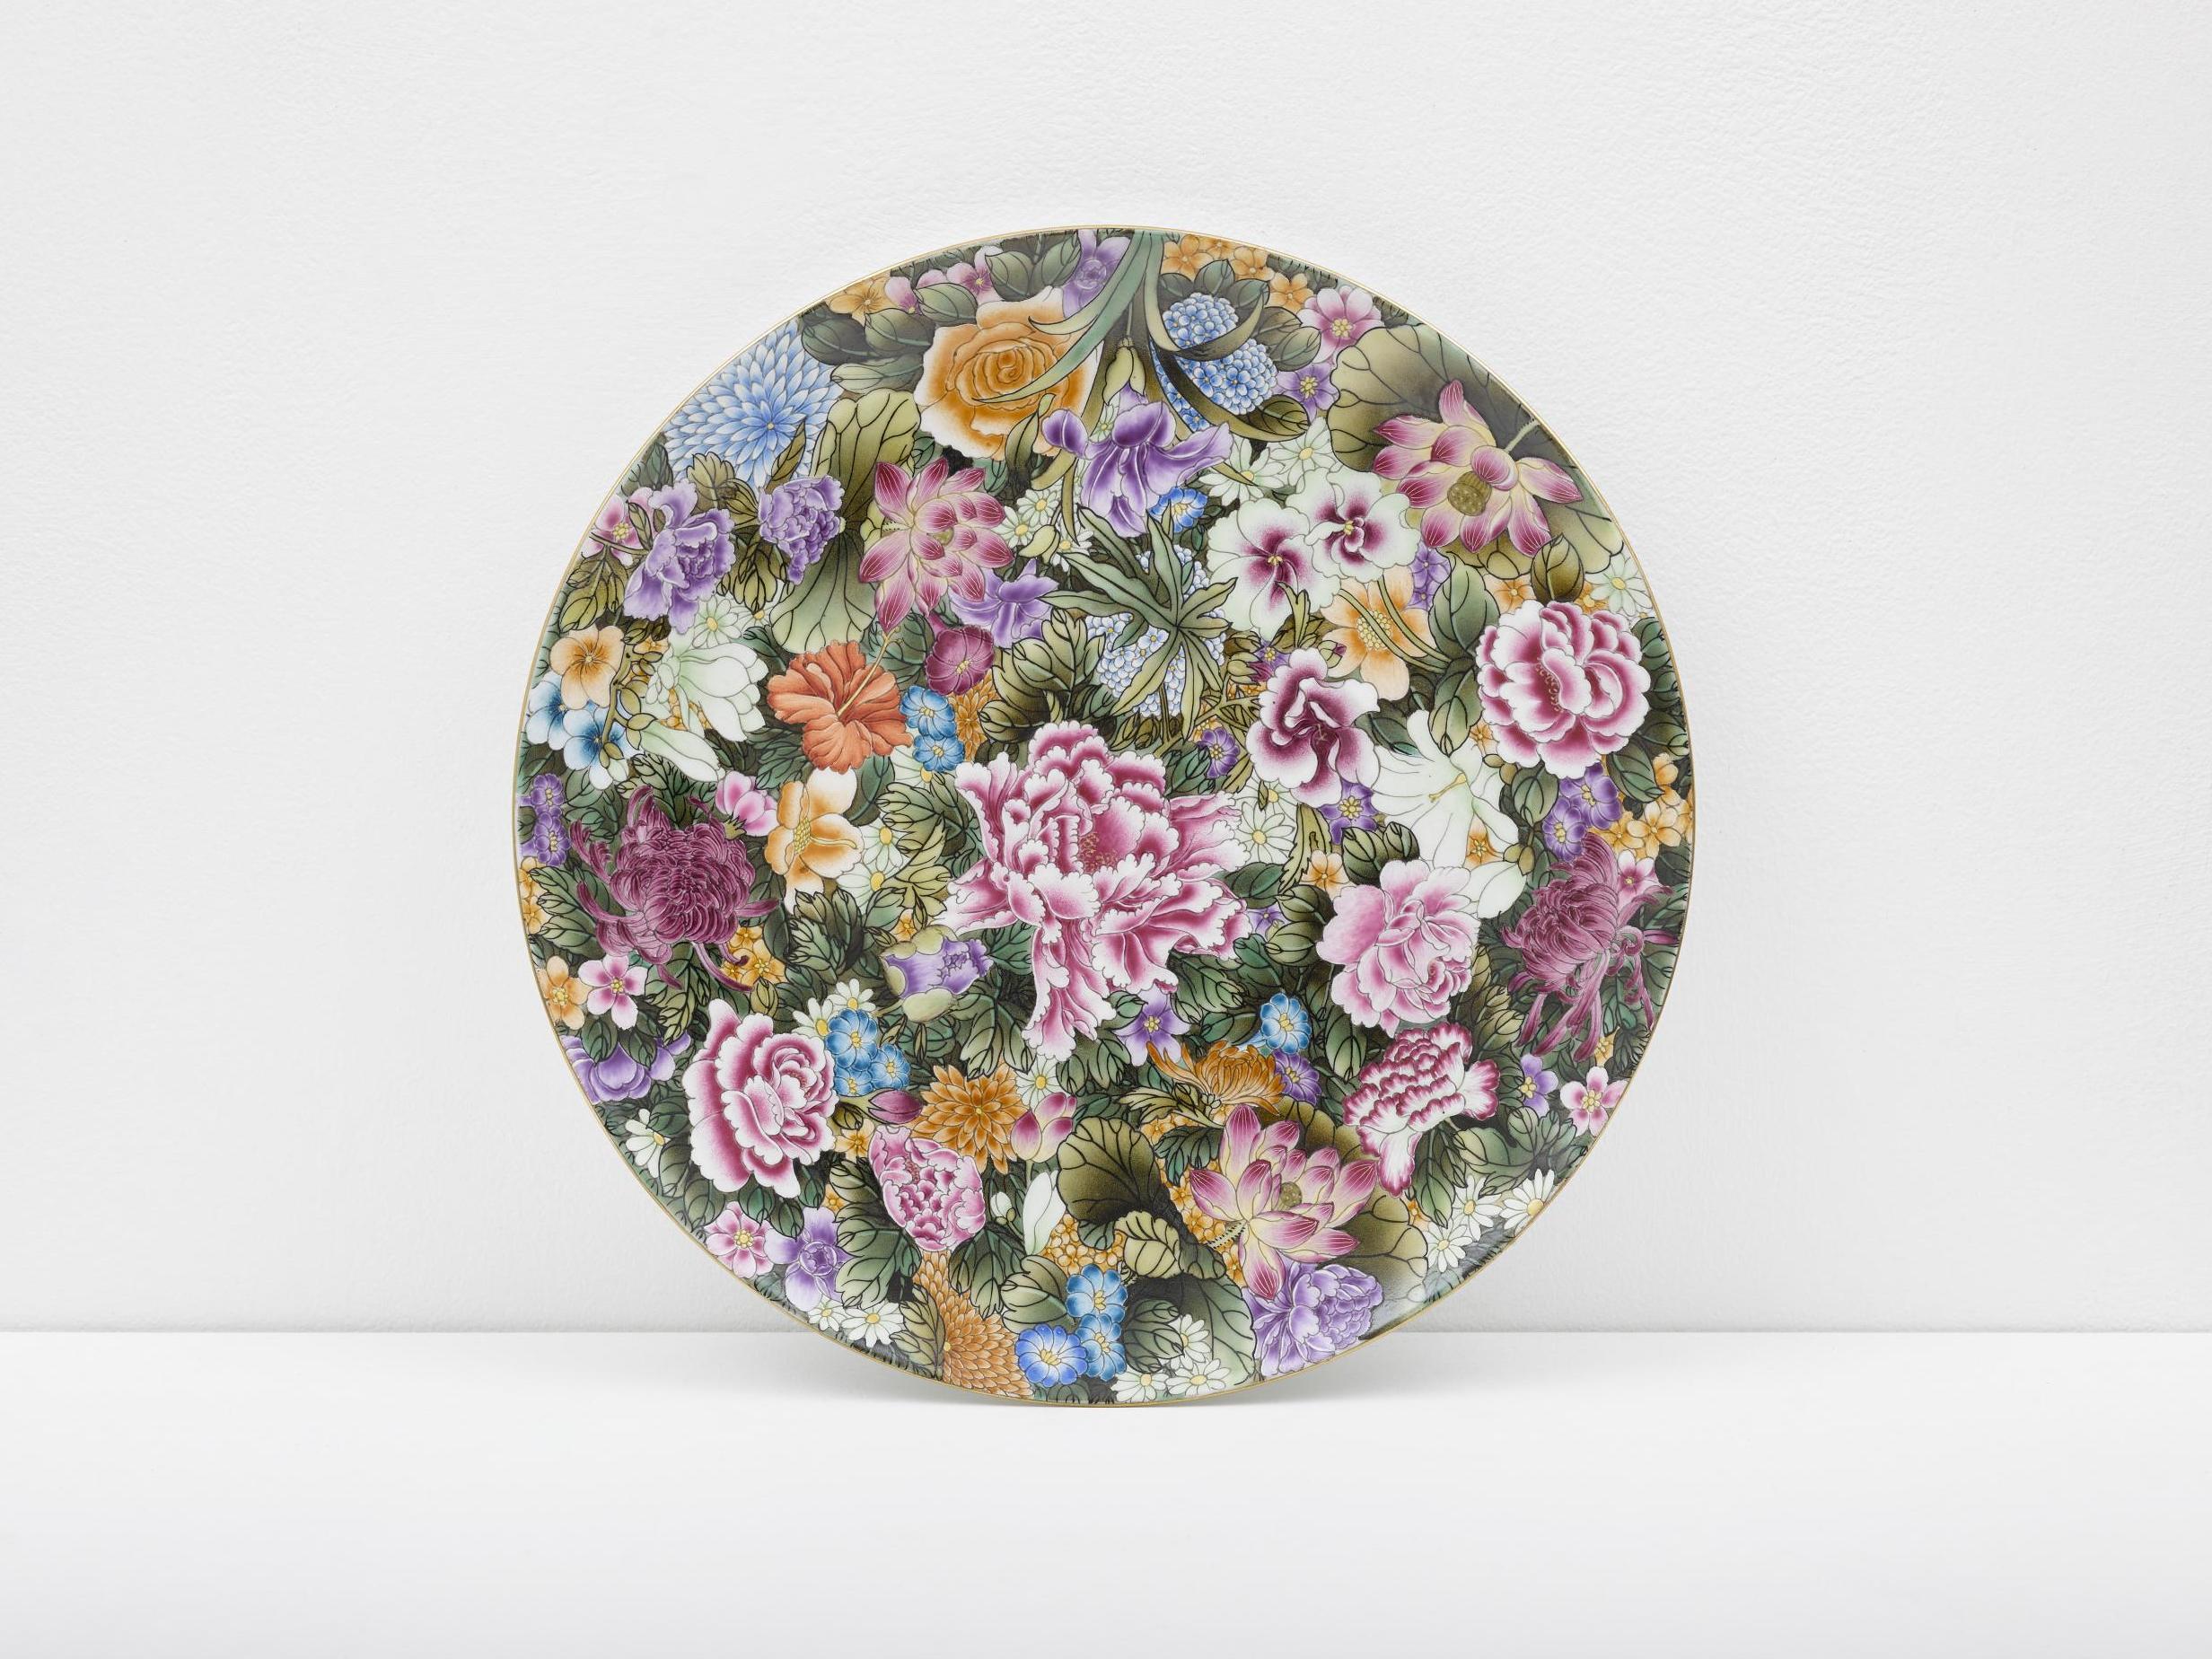 Auction: Ai Weiwei’蝉 Small Plate with Flowers, 2014, is among lots including works by Bridget Riley and Yinka Shonibare